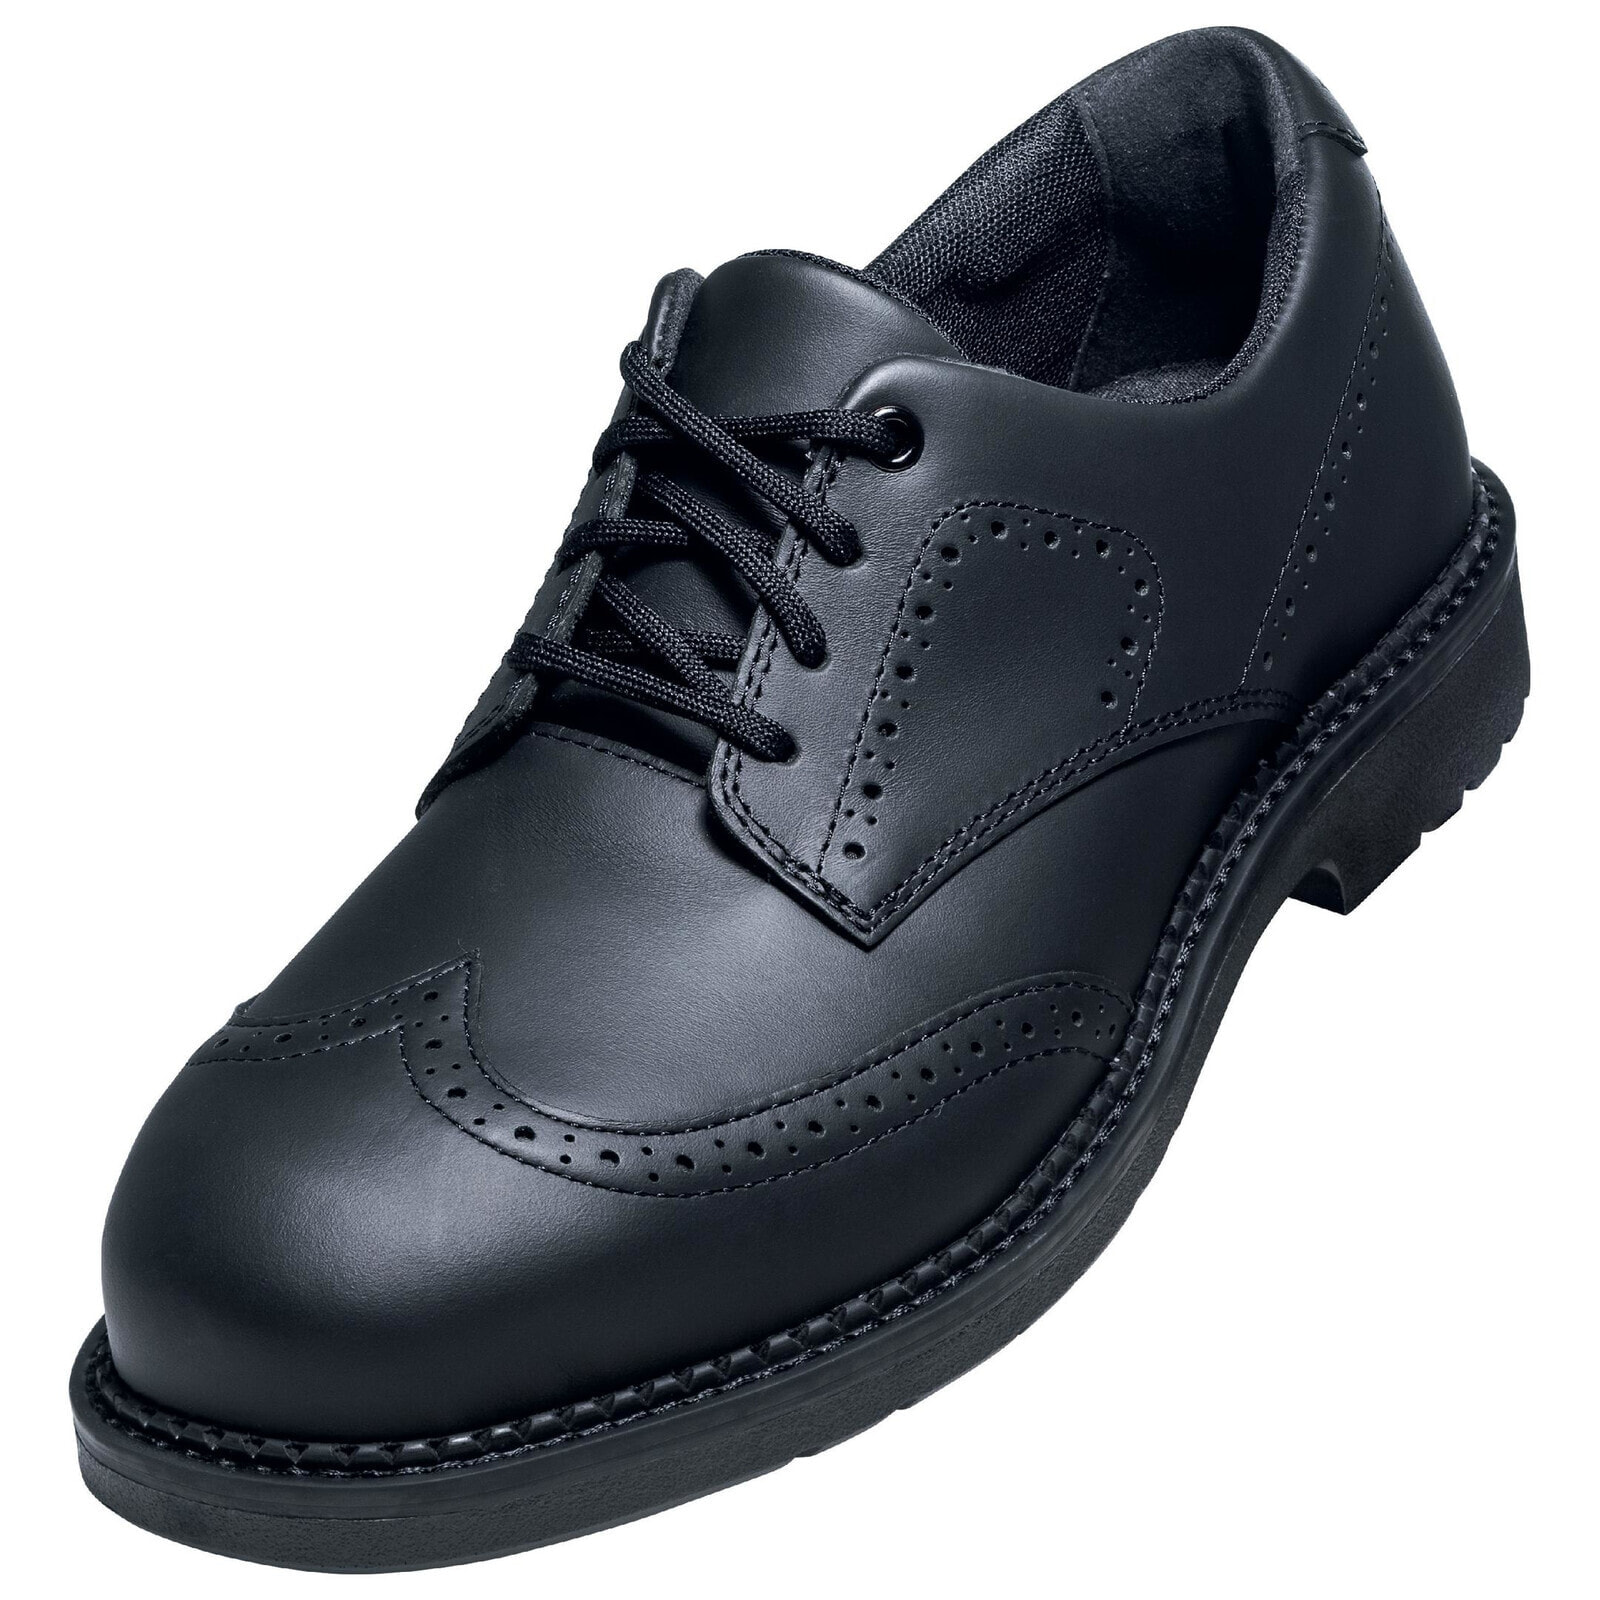 UVEX Arbeitsschutz 84481 - Male - Adult - Safety shoes - Black - ESD - S3 - SRC - Lace-up closure